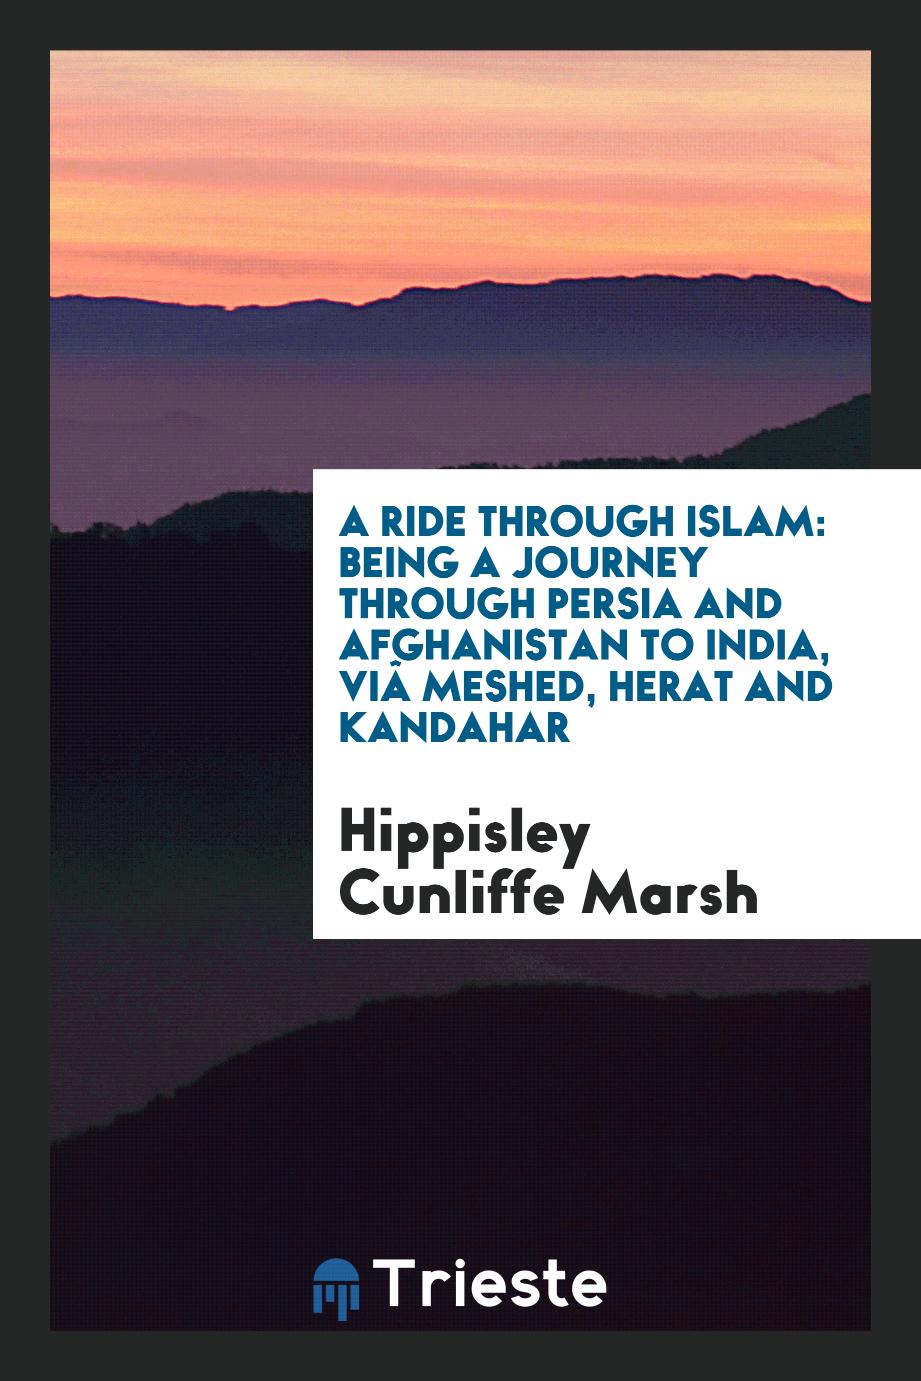 A Ride Through Islam: Being a Journey Through Persia and Afghanistan to India, viâ Meshed, Herat and Kandahar